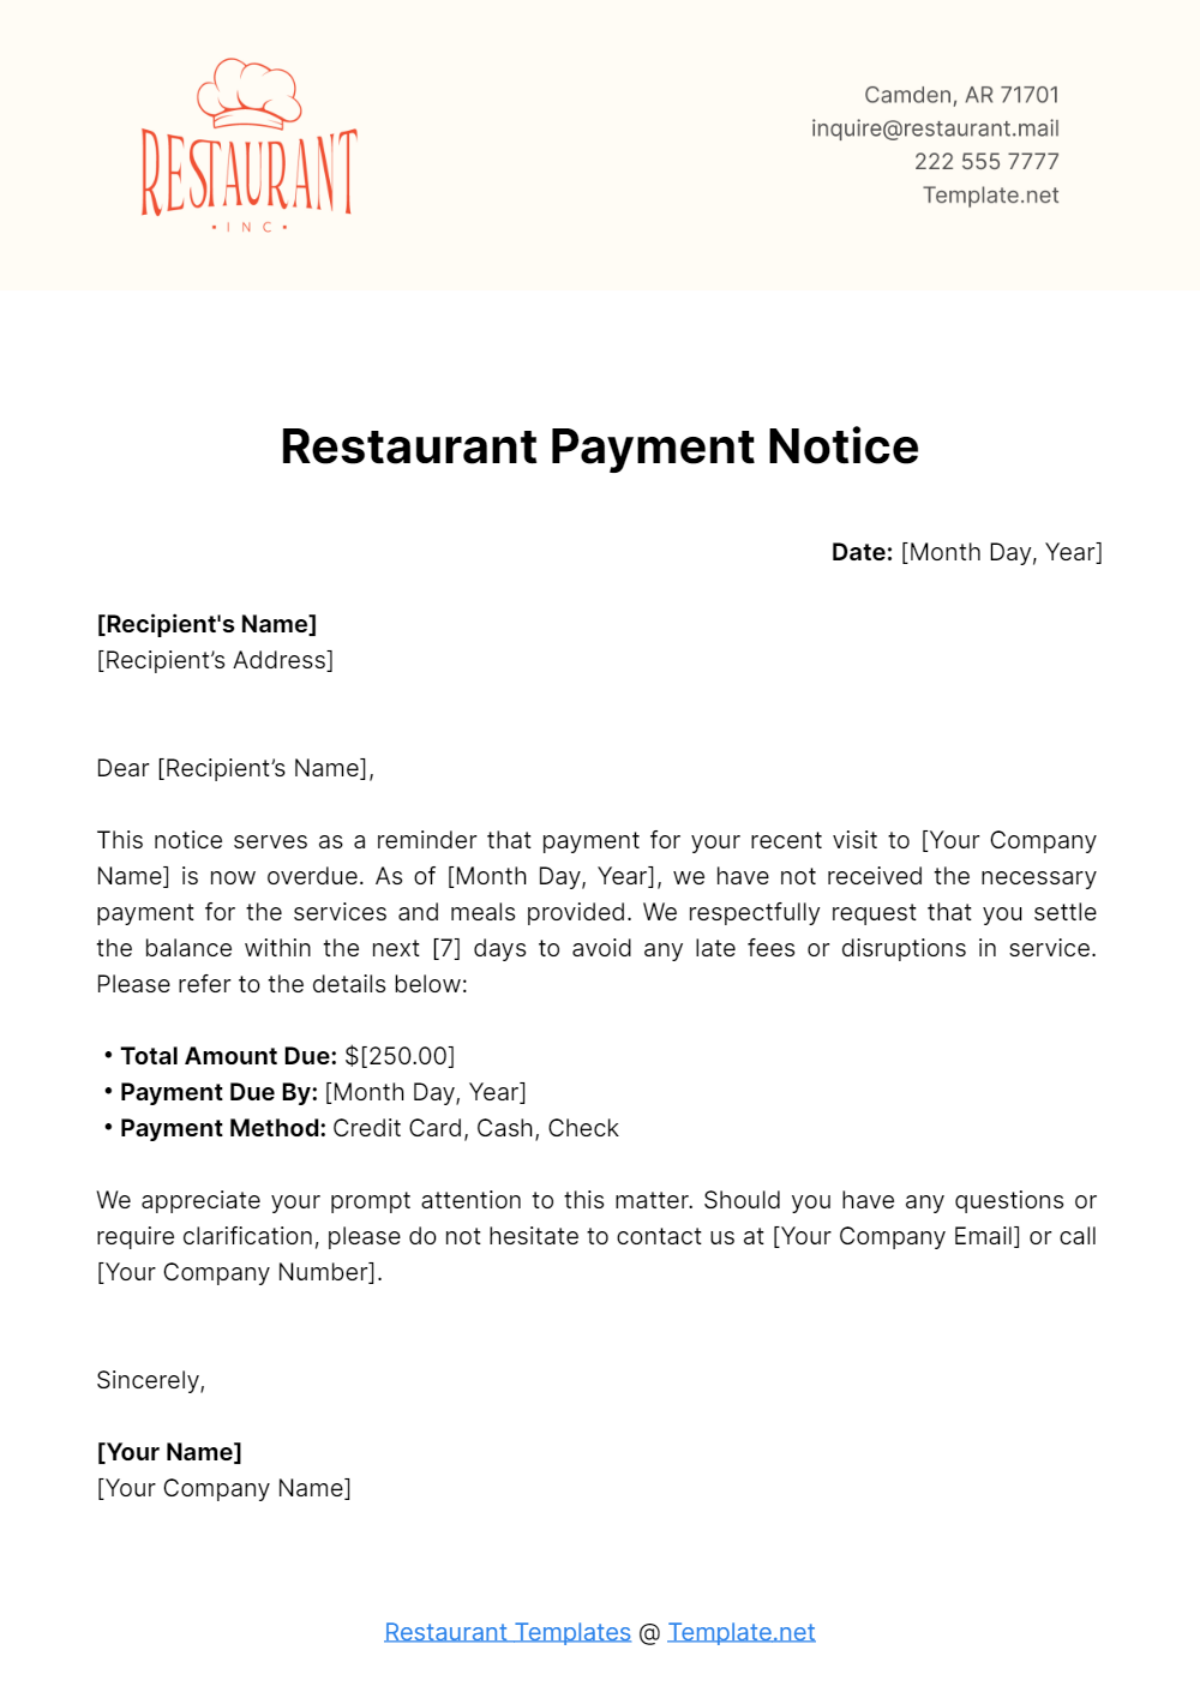 Free Restaurant Payment Notice Template